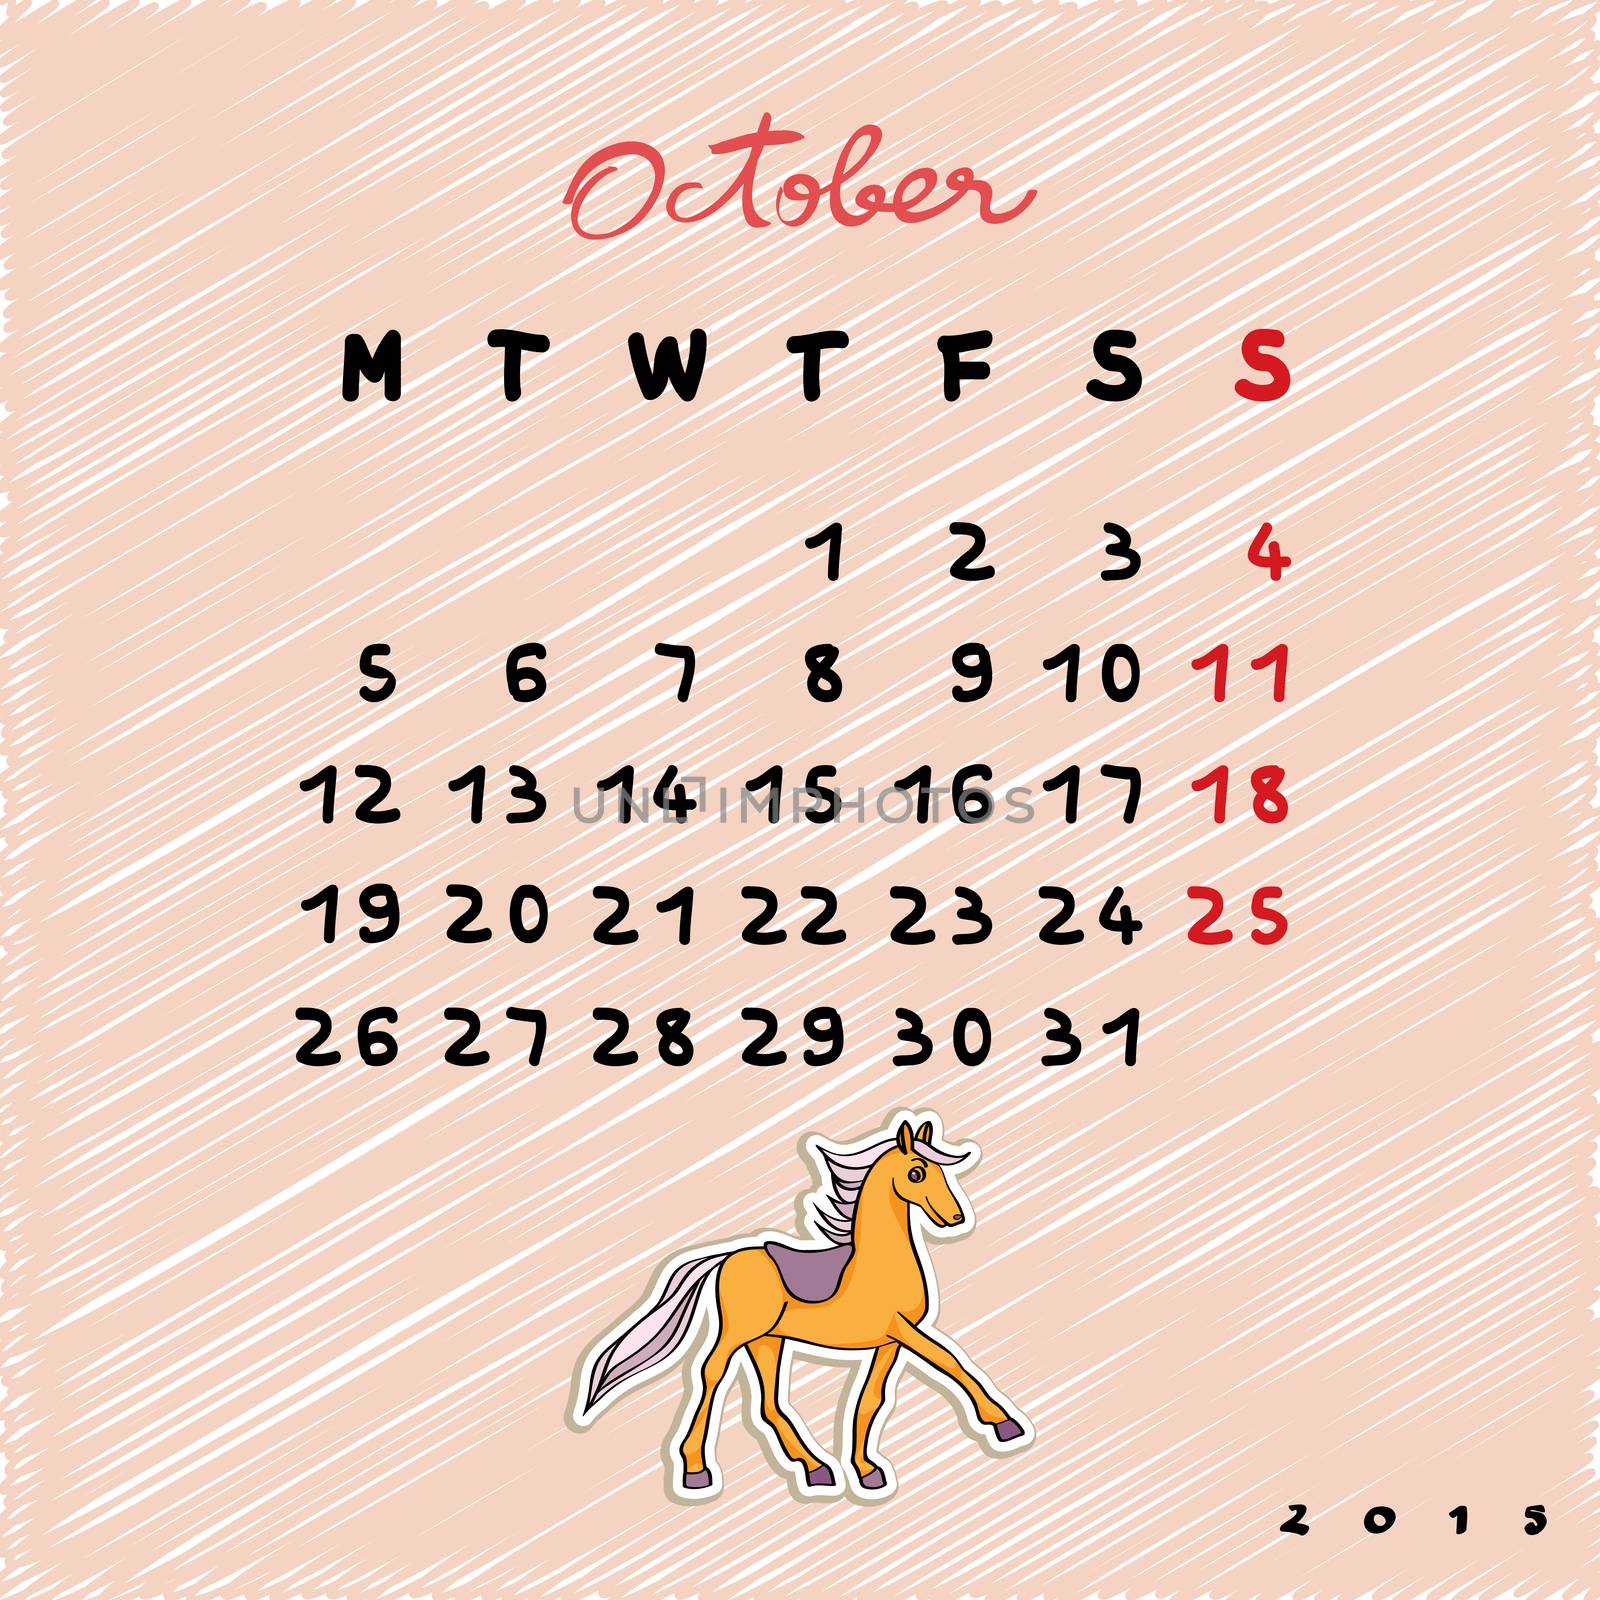 Calendar 2015 with toy horse, graphic illustration of October month calendar with original hand drawn text